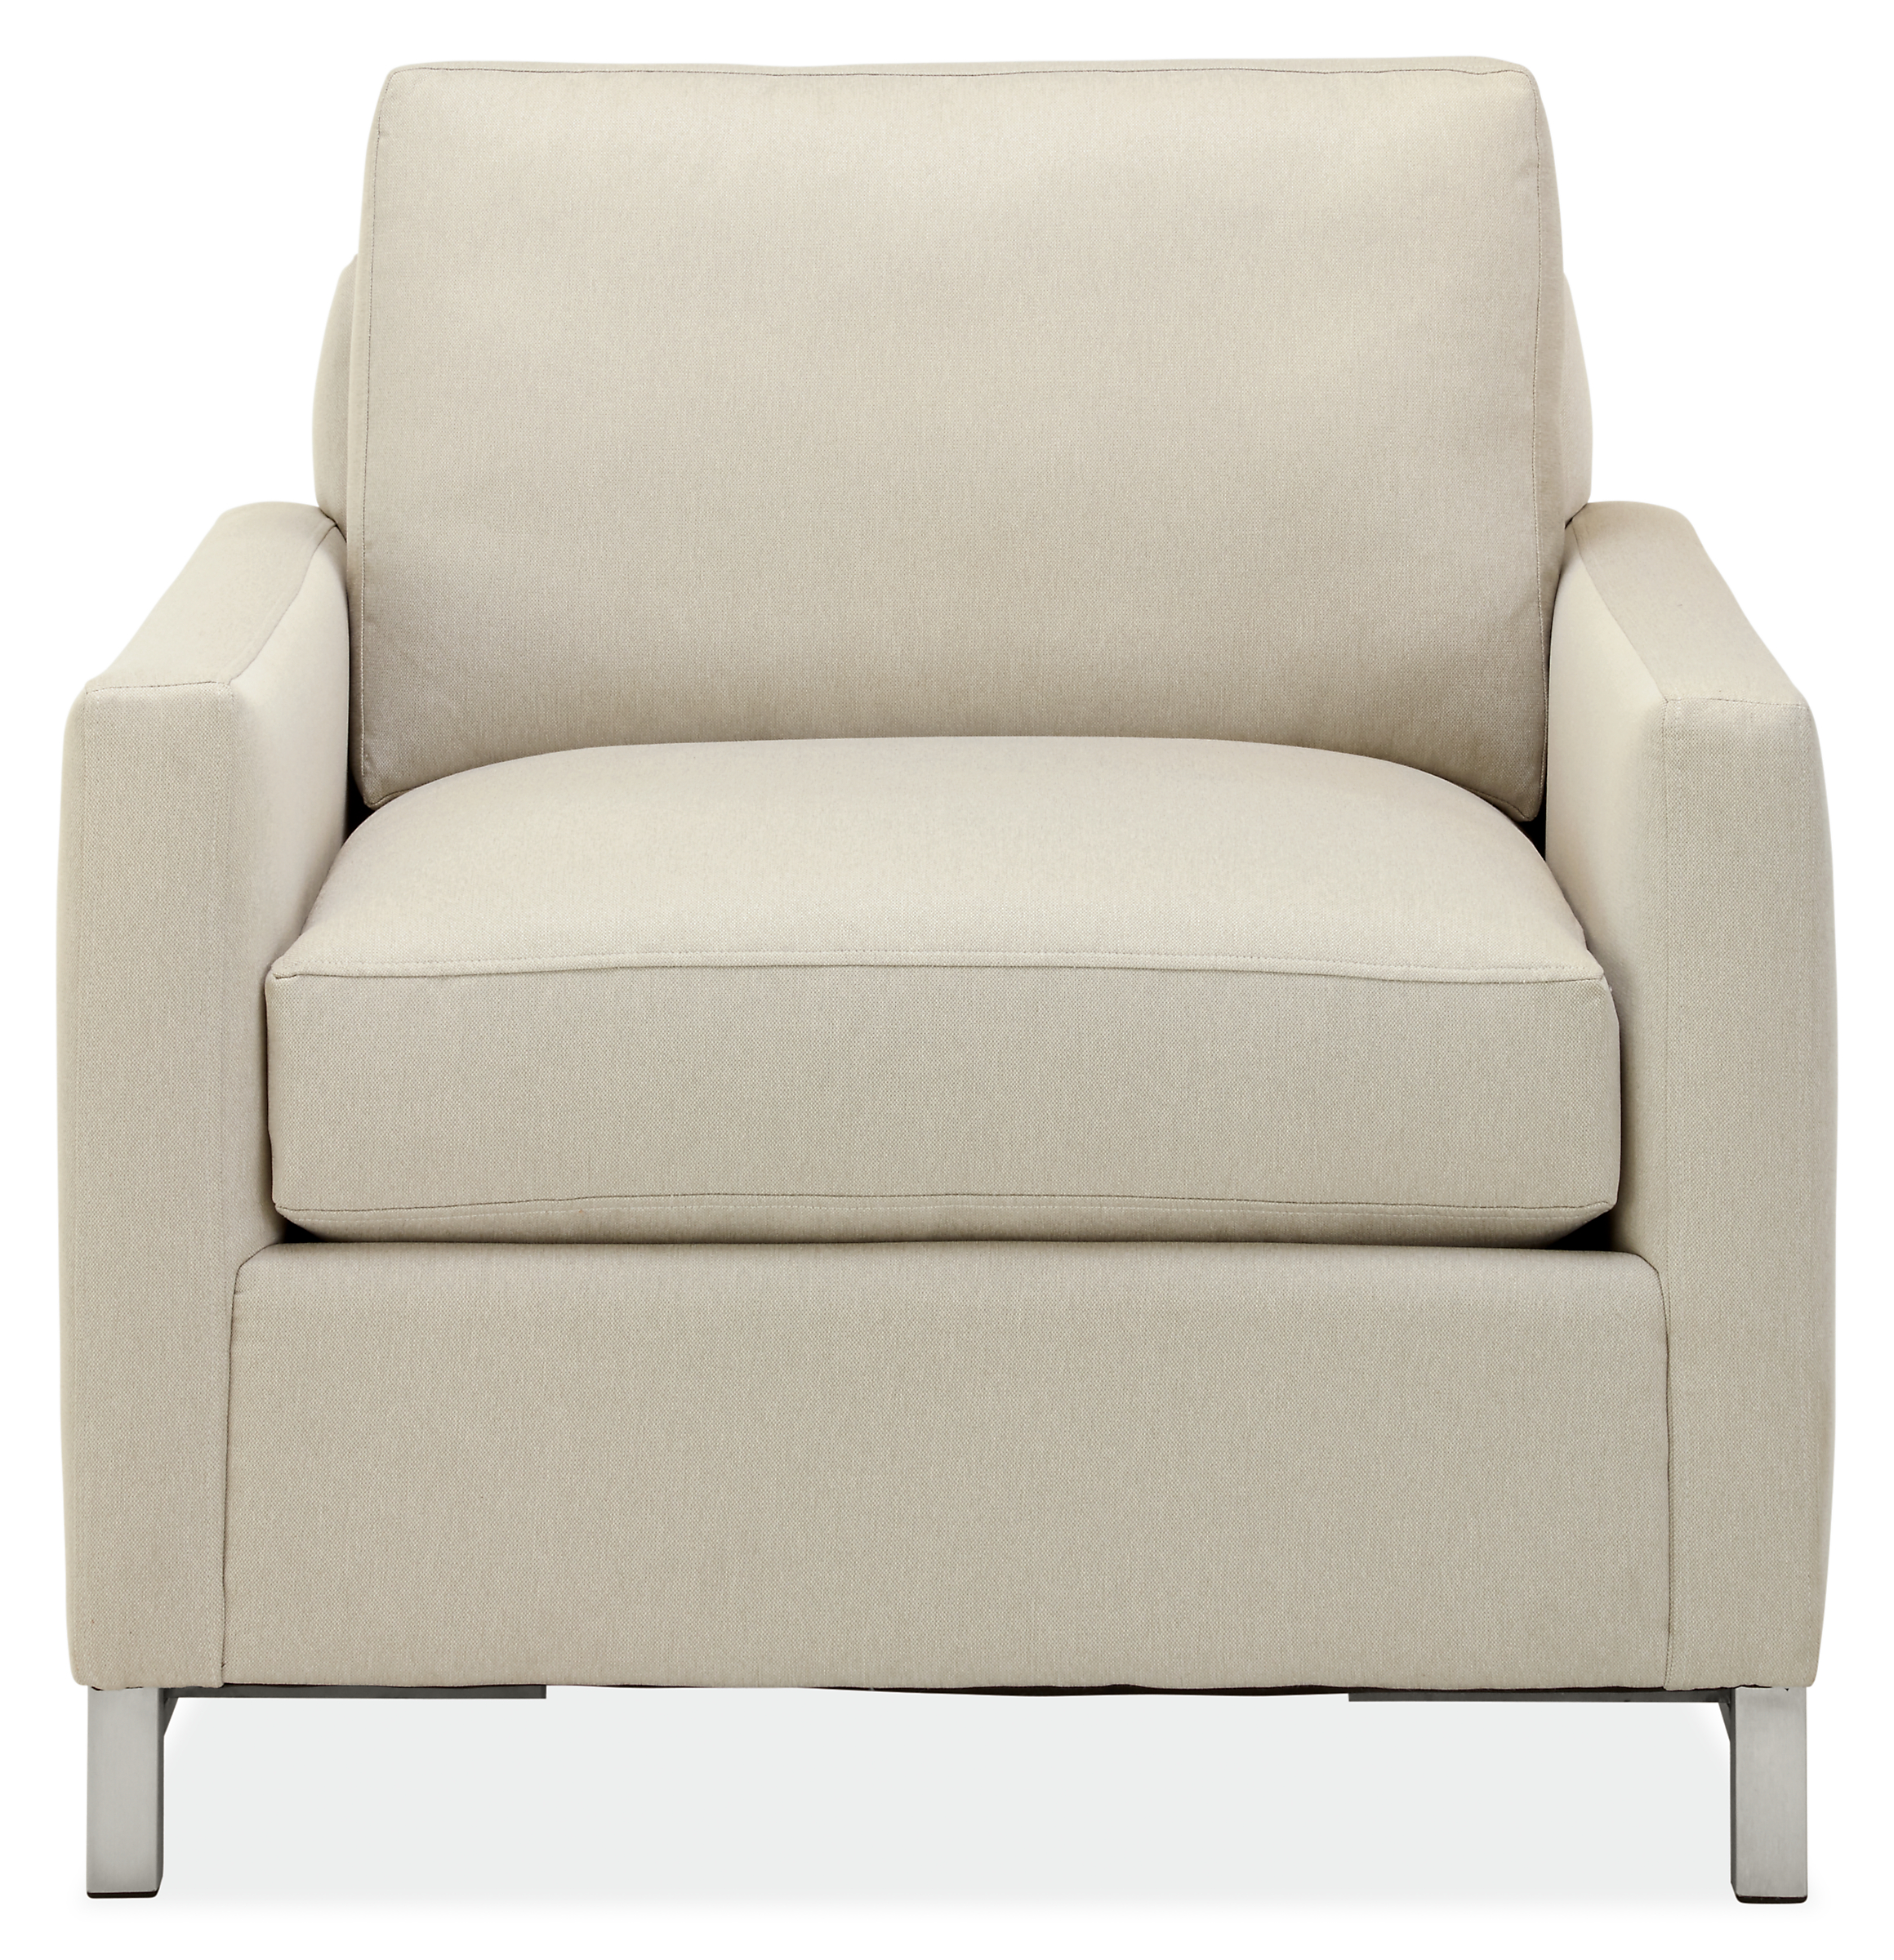 Front view of Stevens Chair in Dawson Fabric.